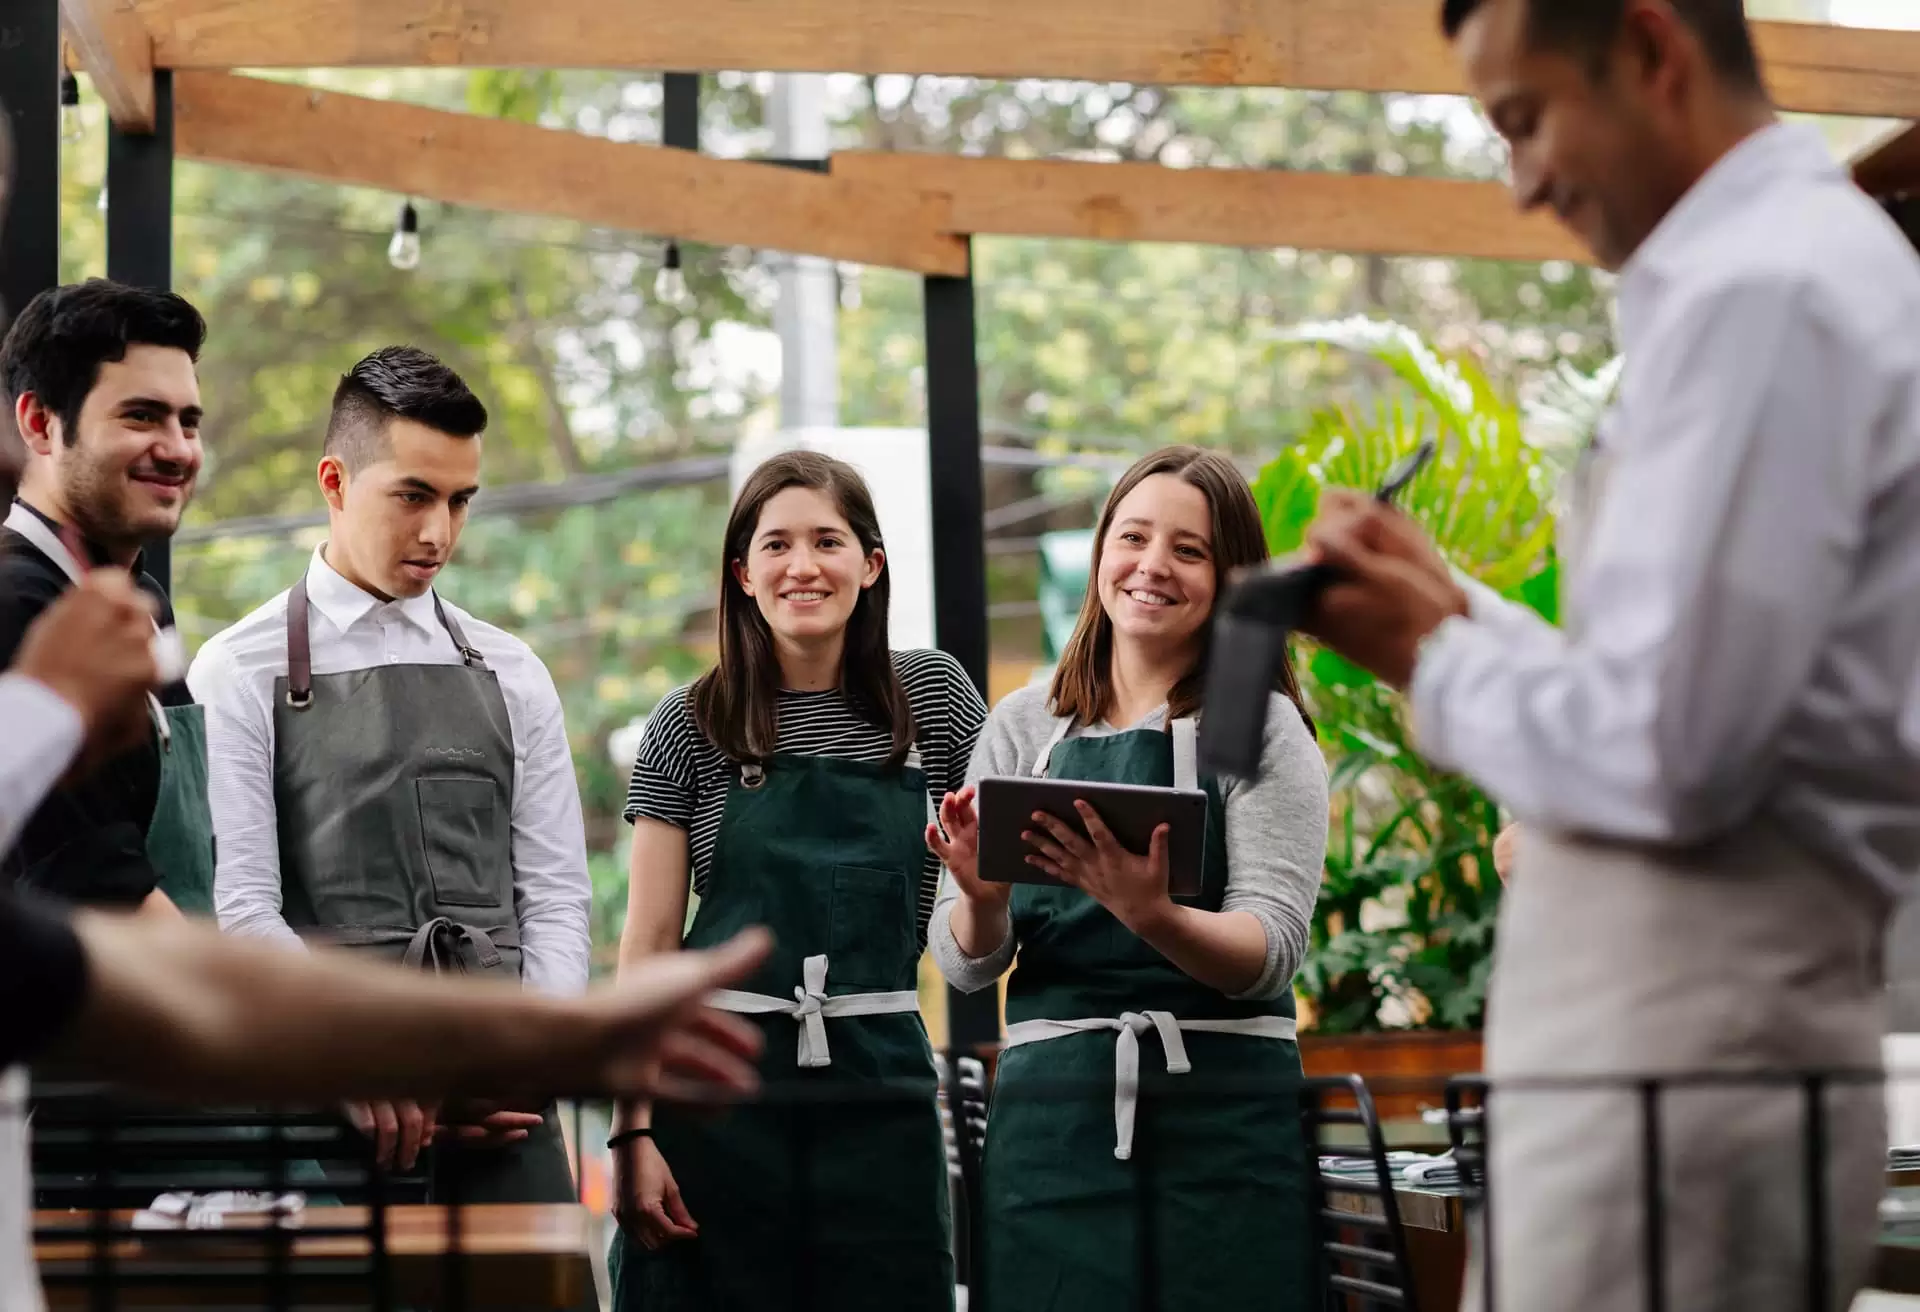 What guests need to know when picking a restaurant